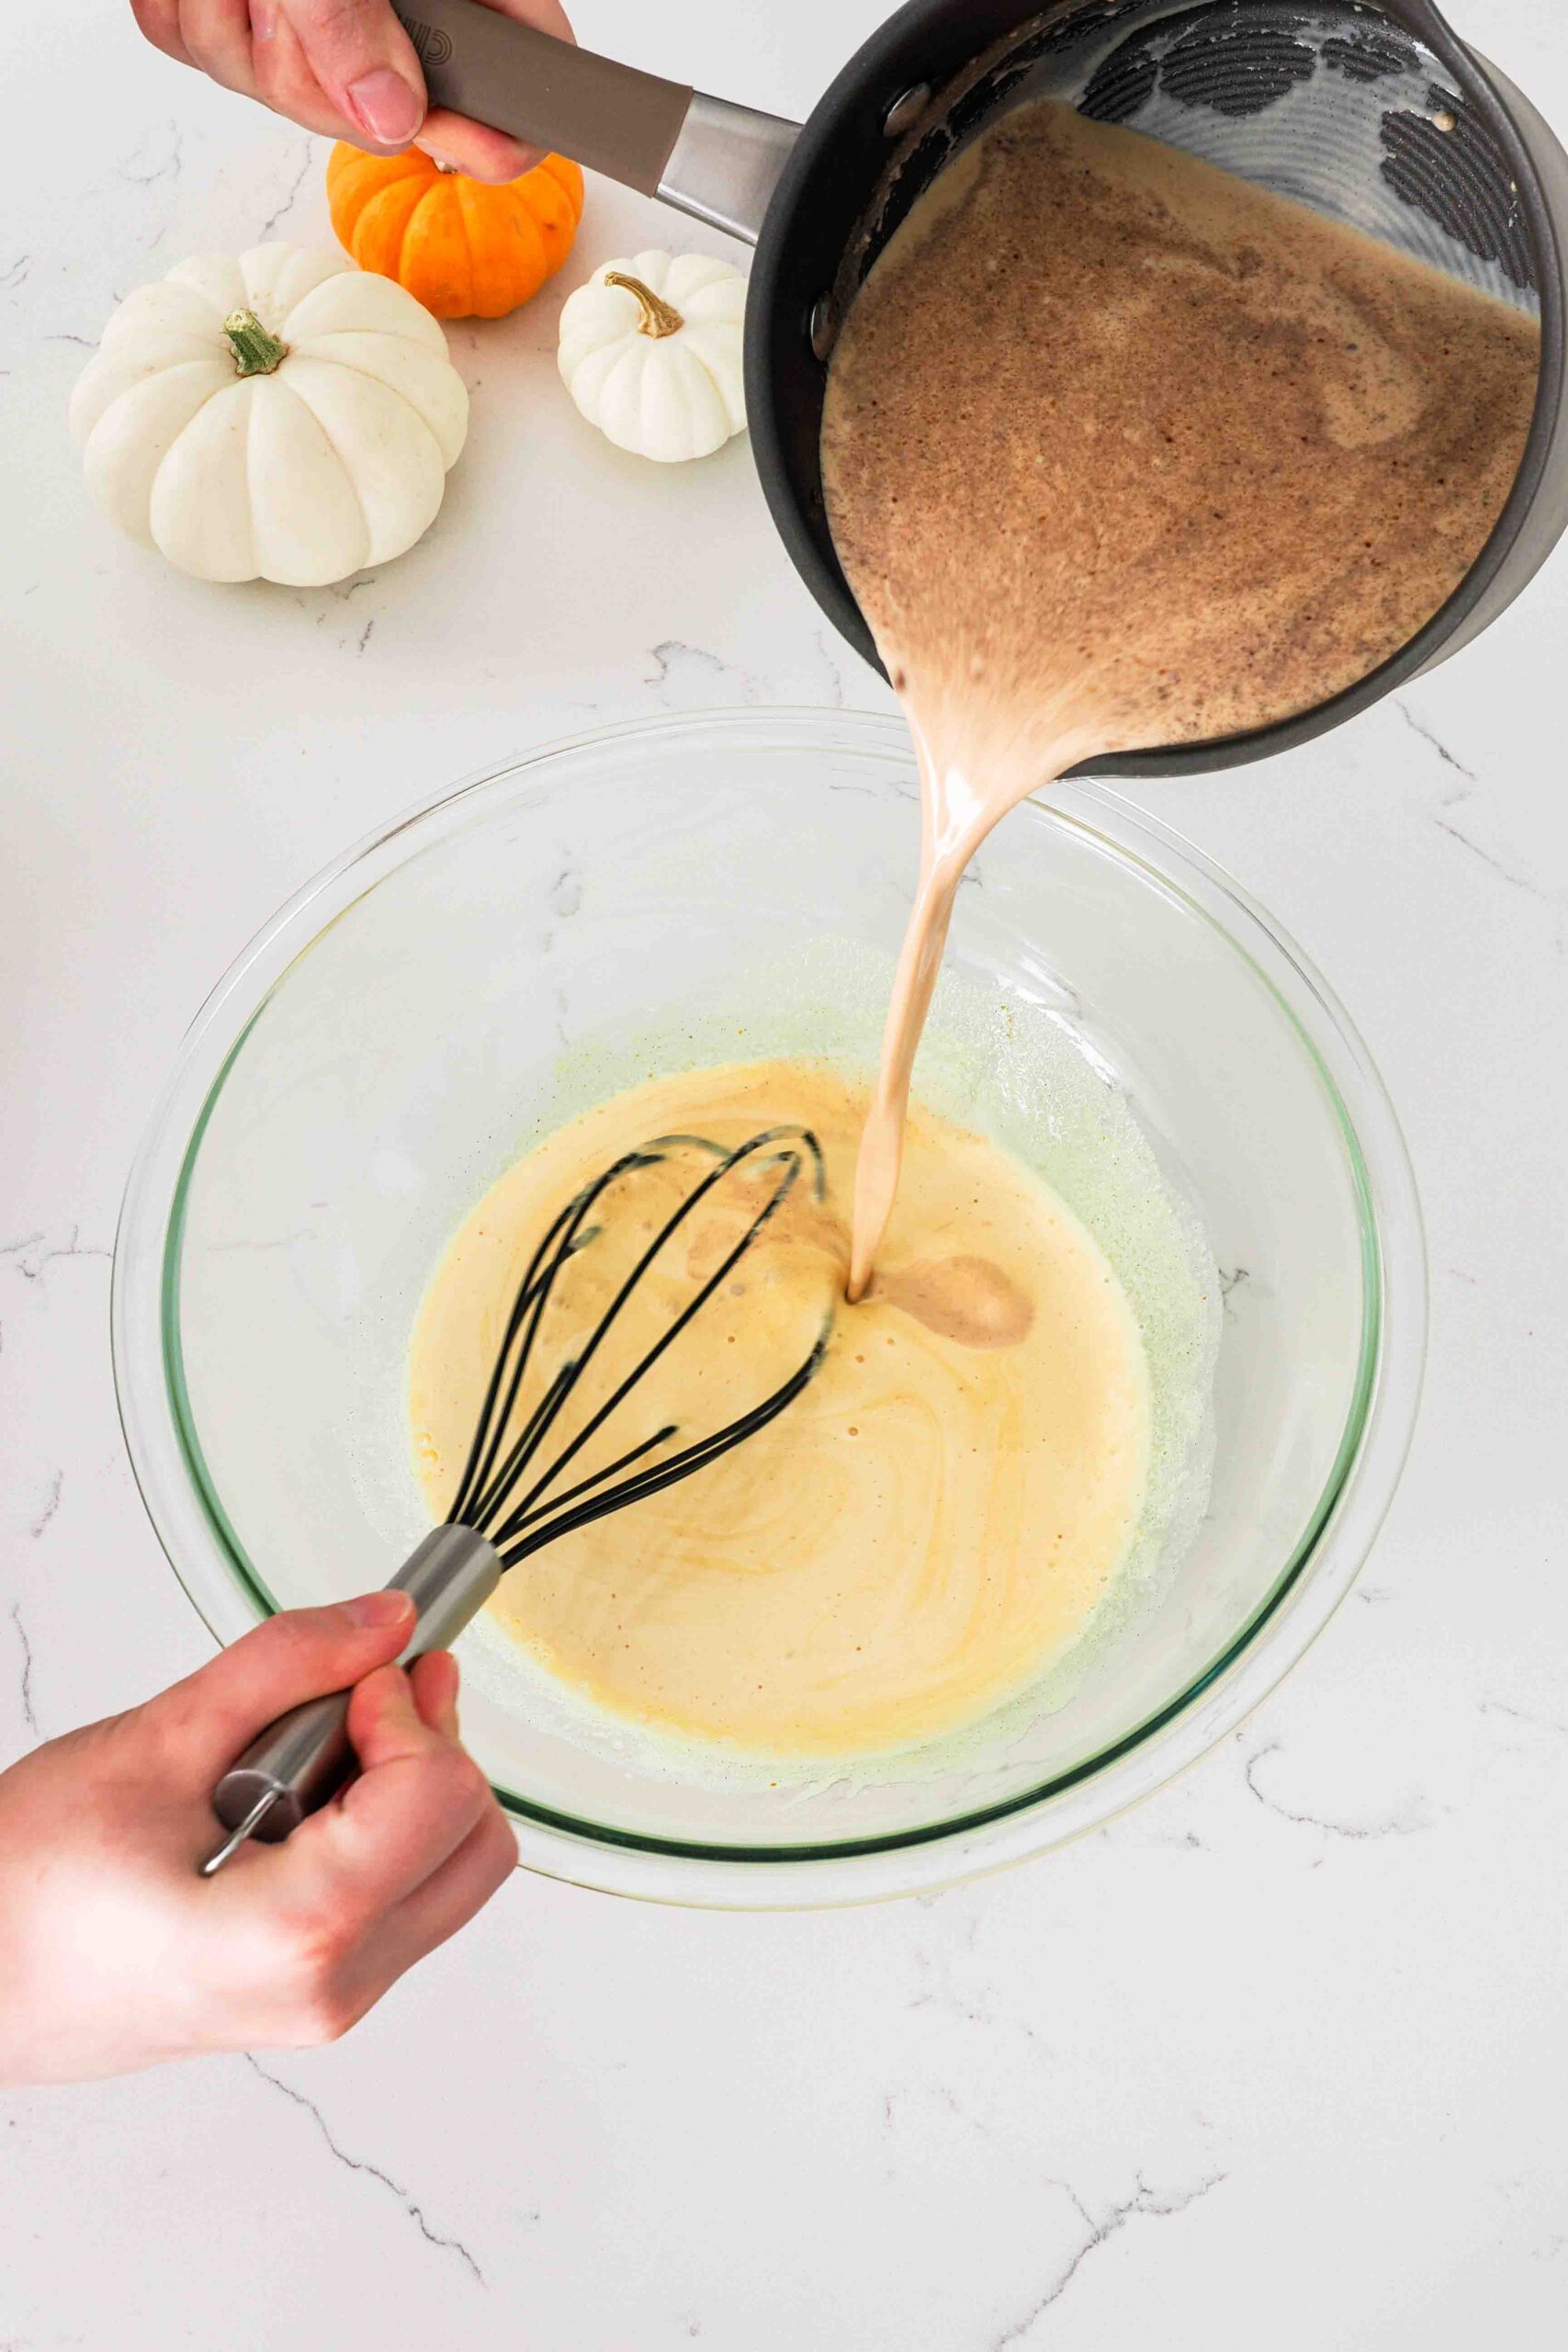 Pumpkin cream is poured into a large bowl to temper the egg yolks.